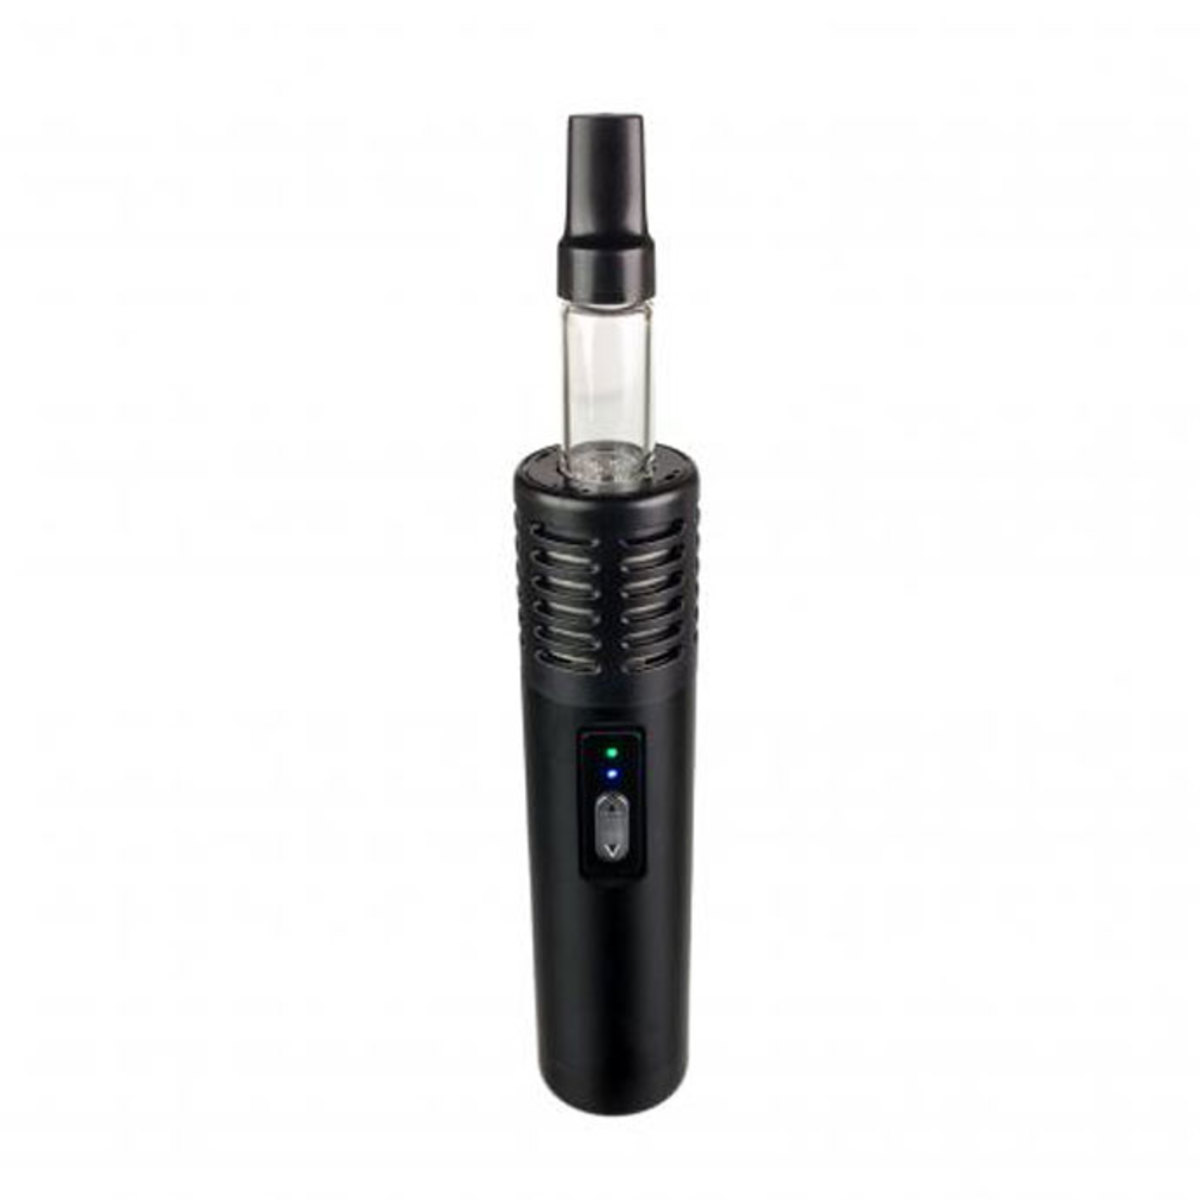 Gadgets: The Airizer Air and Extreme-Q Vaporizers Reviewed